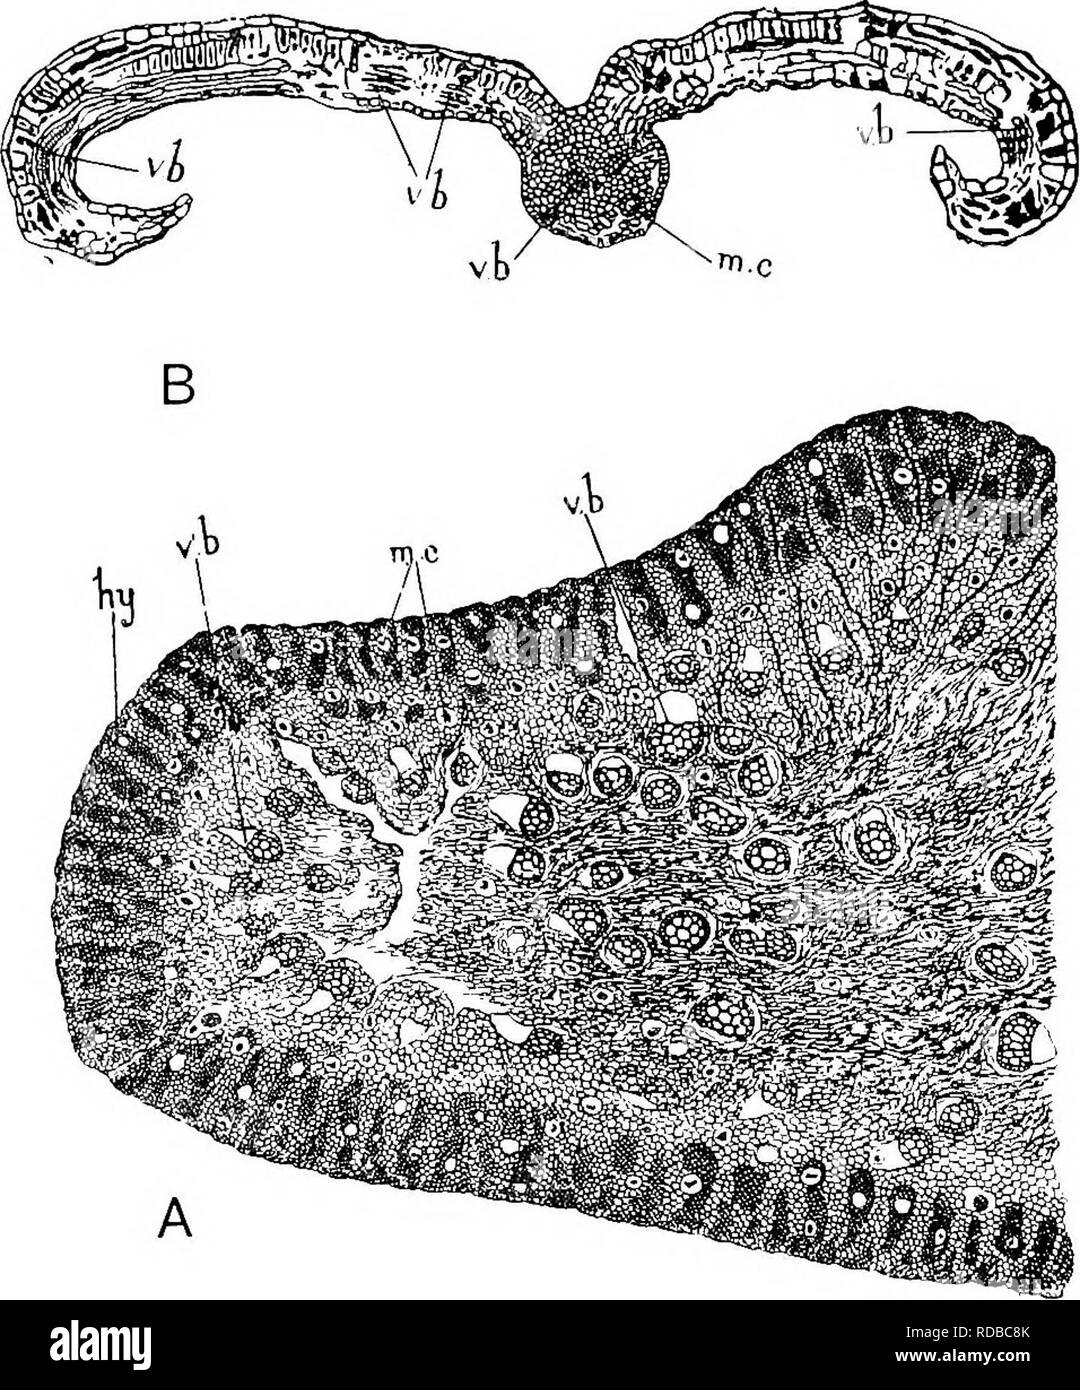 . Studies in fossil botany . Paleobotany. 436 STUDIES IN FOSSIL BOTANY and above this level no more bundles were received (see Fig. 164, C). The petiole, where it first detaches itself. •^SM Fig. 167.—Meduilosa'augHca. A. Transverse section of petiole, showing the numerous vascular bundles, v.b ; ?n.c, mucilage-canals ; hy, hypoderma, with sclerenchymatous ribs. The whole has the structure of &quot; Myelo.xylon Laiidrioiii.&quot; x about S. S. Coll. 636. (G. T. G.) B. Vertical section of leaflet, v.b, vascular bundles of mid- rib, and lamina ; jj/.c, mucilage-canal. Palisade-tissue shown towar Stock Photo